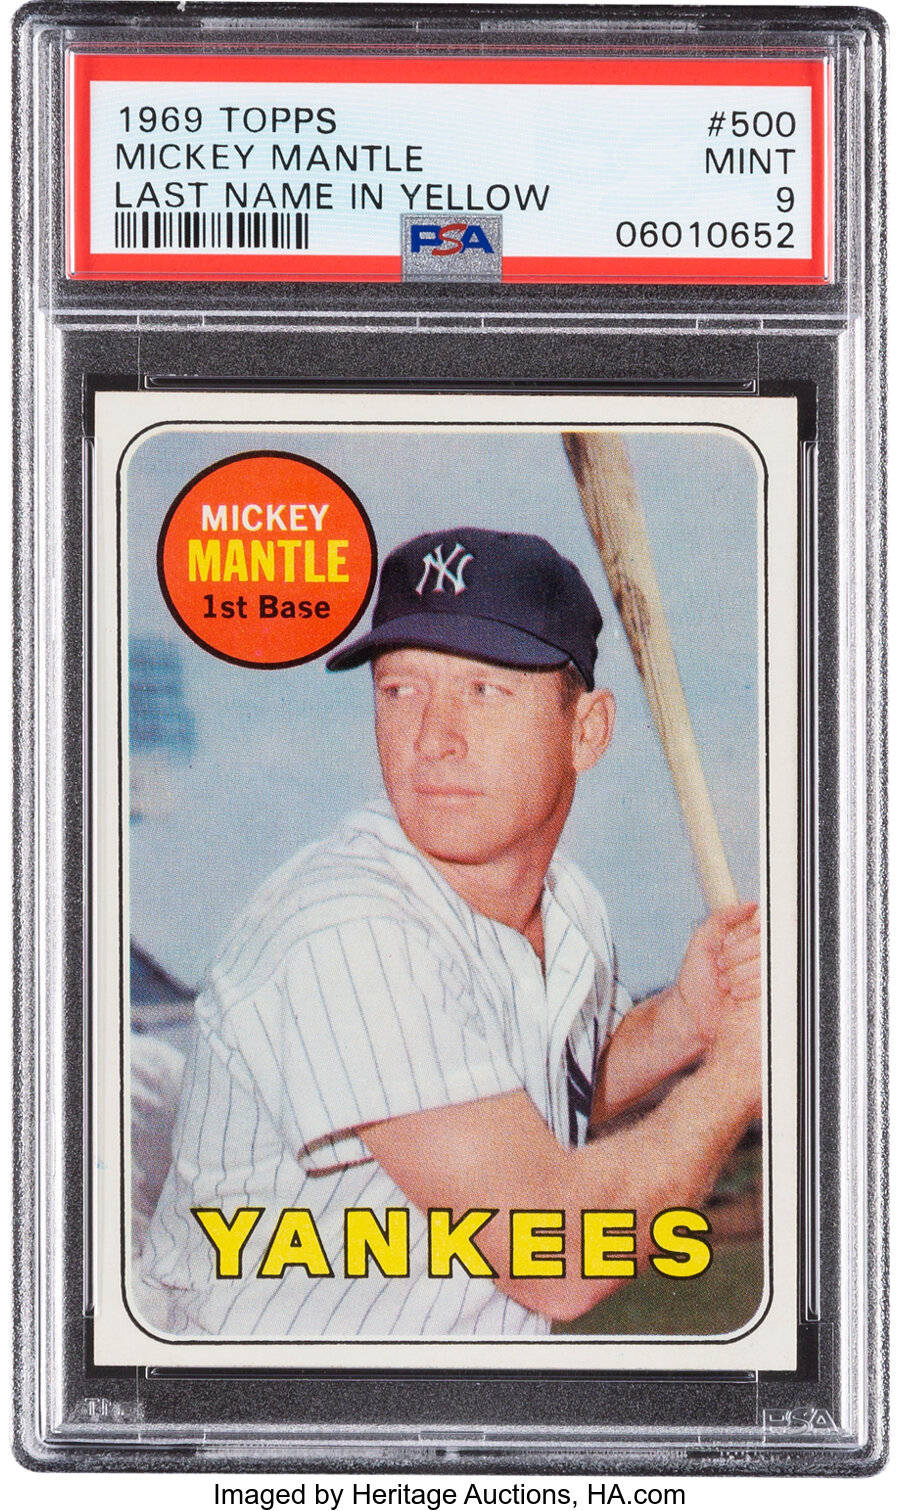 1969 Topps Mickey Mantle (Last Name In Yellow) #500 PSA Mint 9